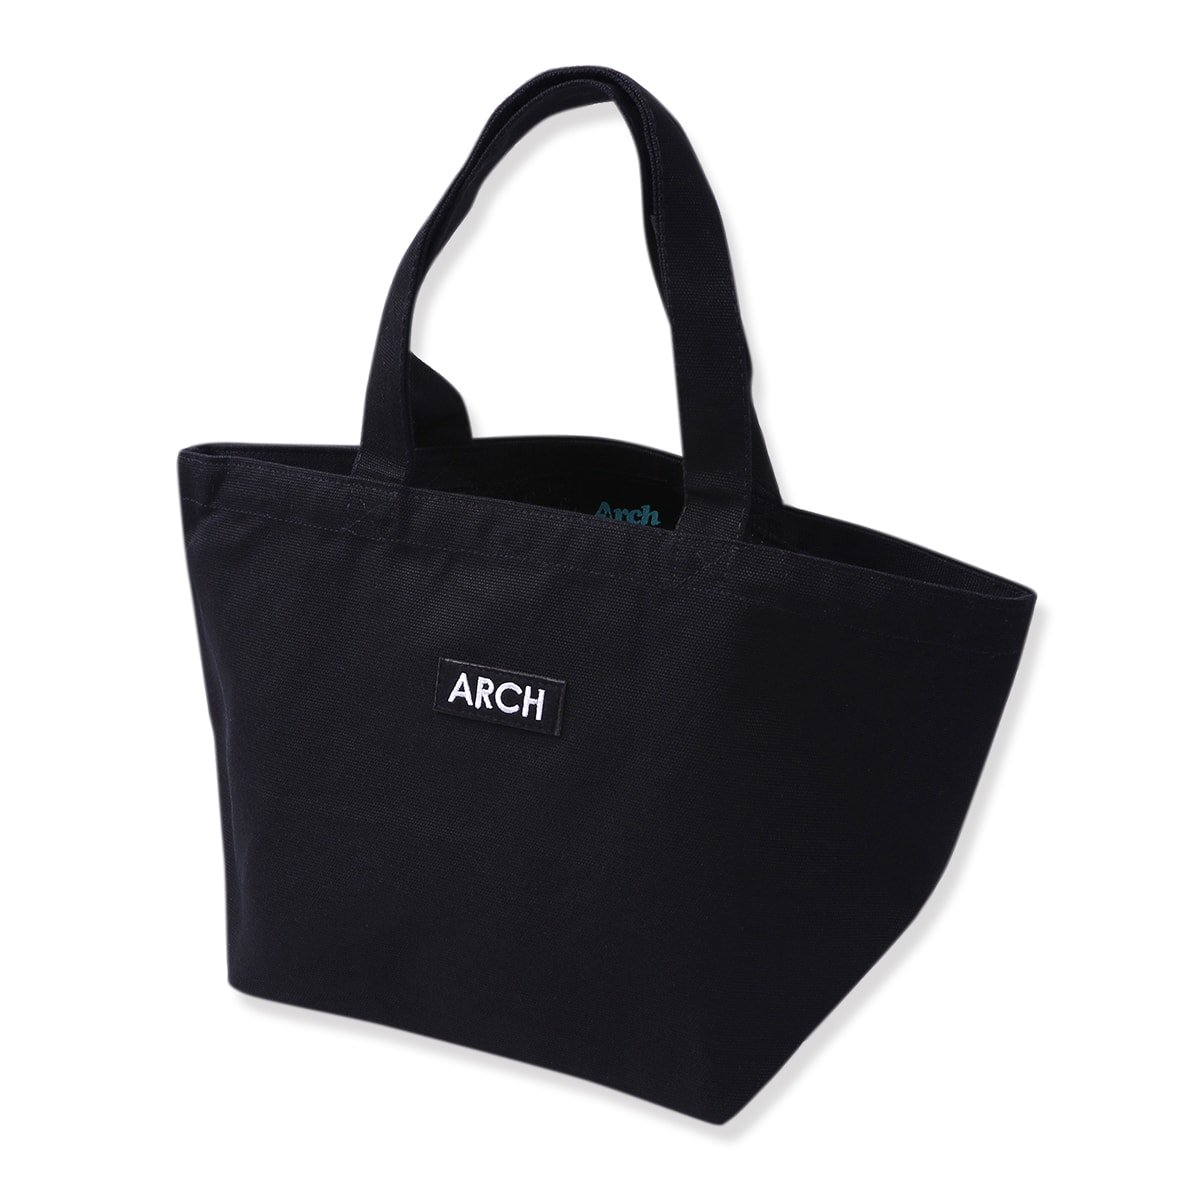 patched tote bag［small］【black】